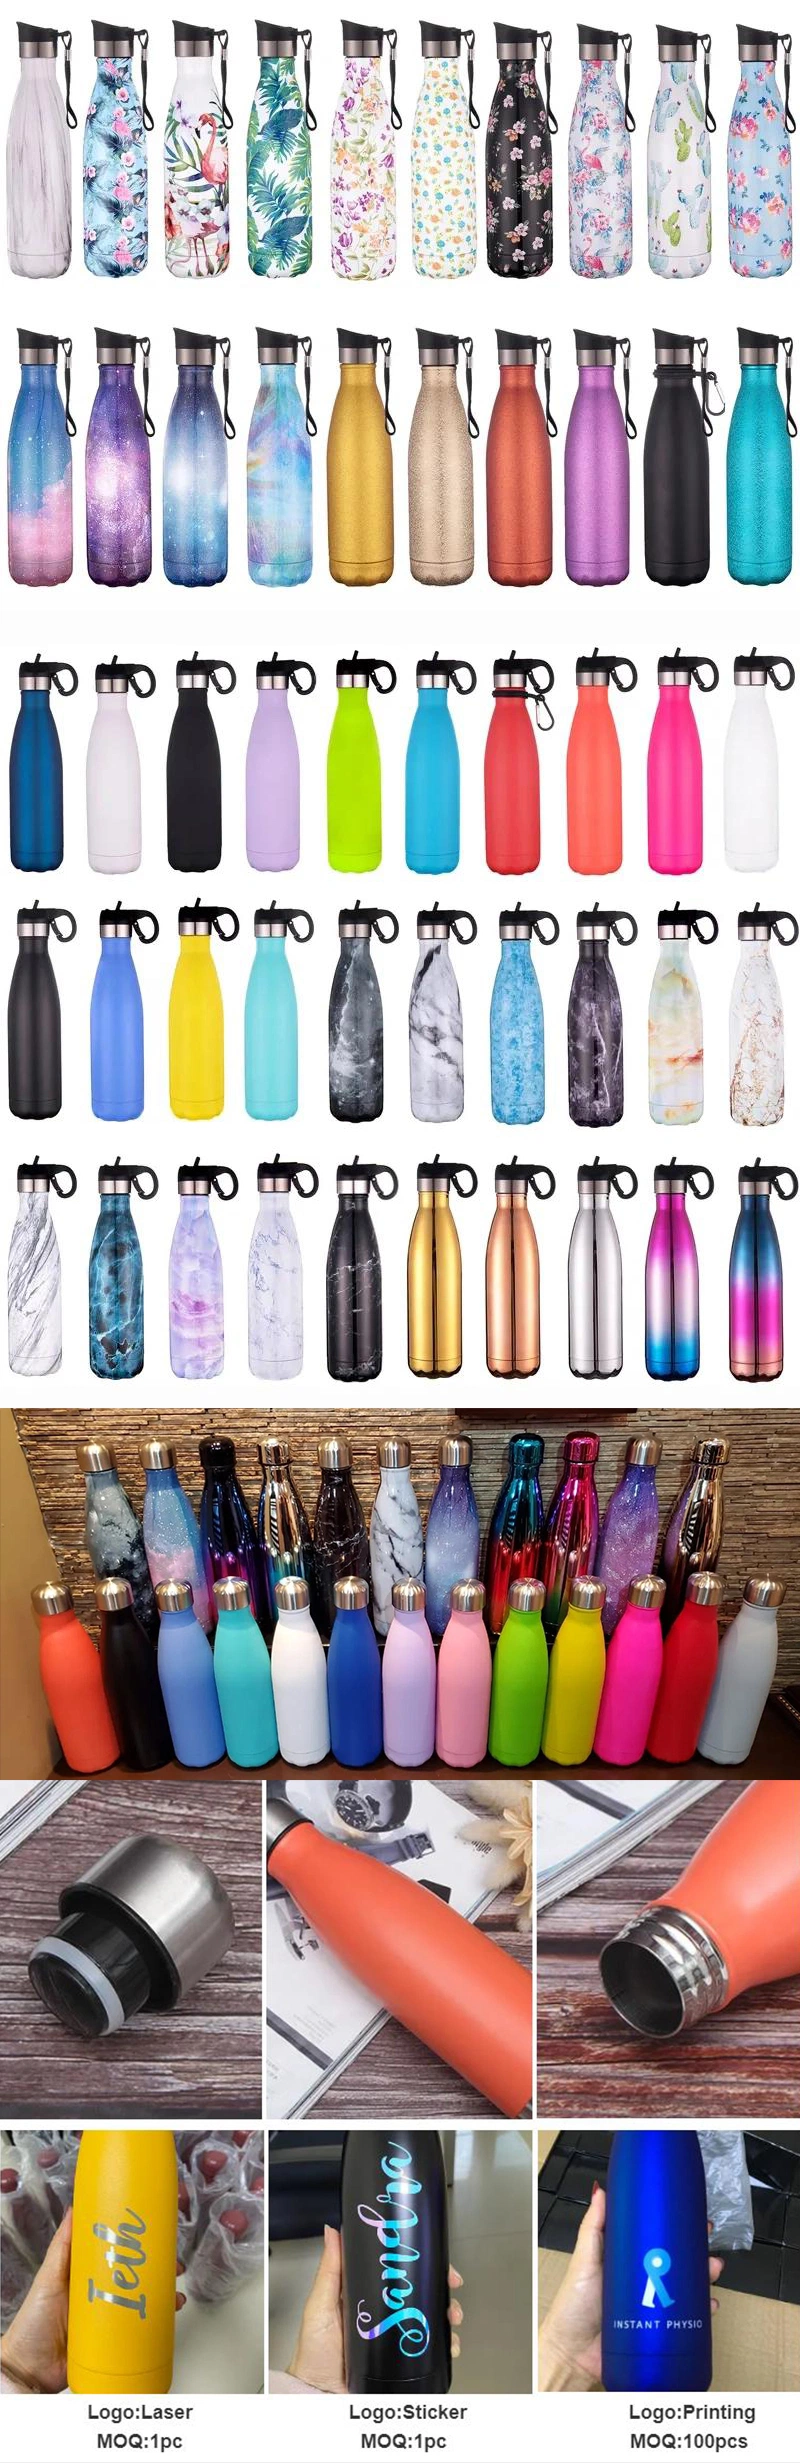 Sports Cola Shape Flask Double Wall Insulated Stainless Steel Water Bottle